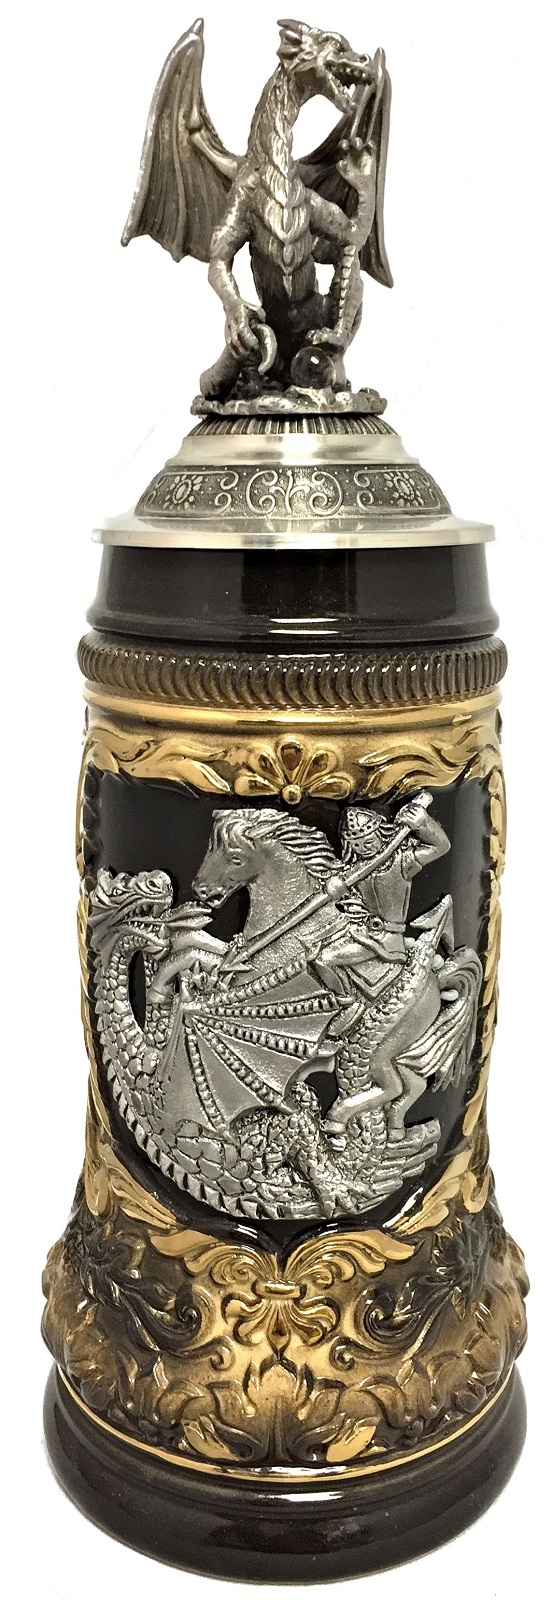 St. George the Dragon Slayer with Pewter Dragon Lid LE German Beer Stein .5 L